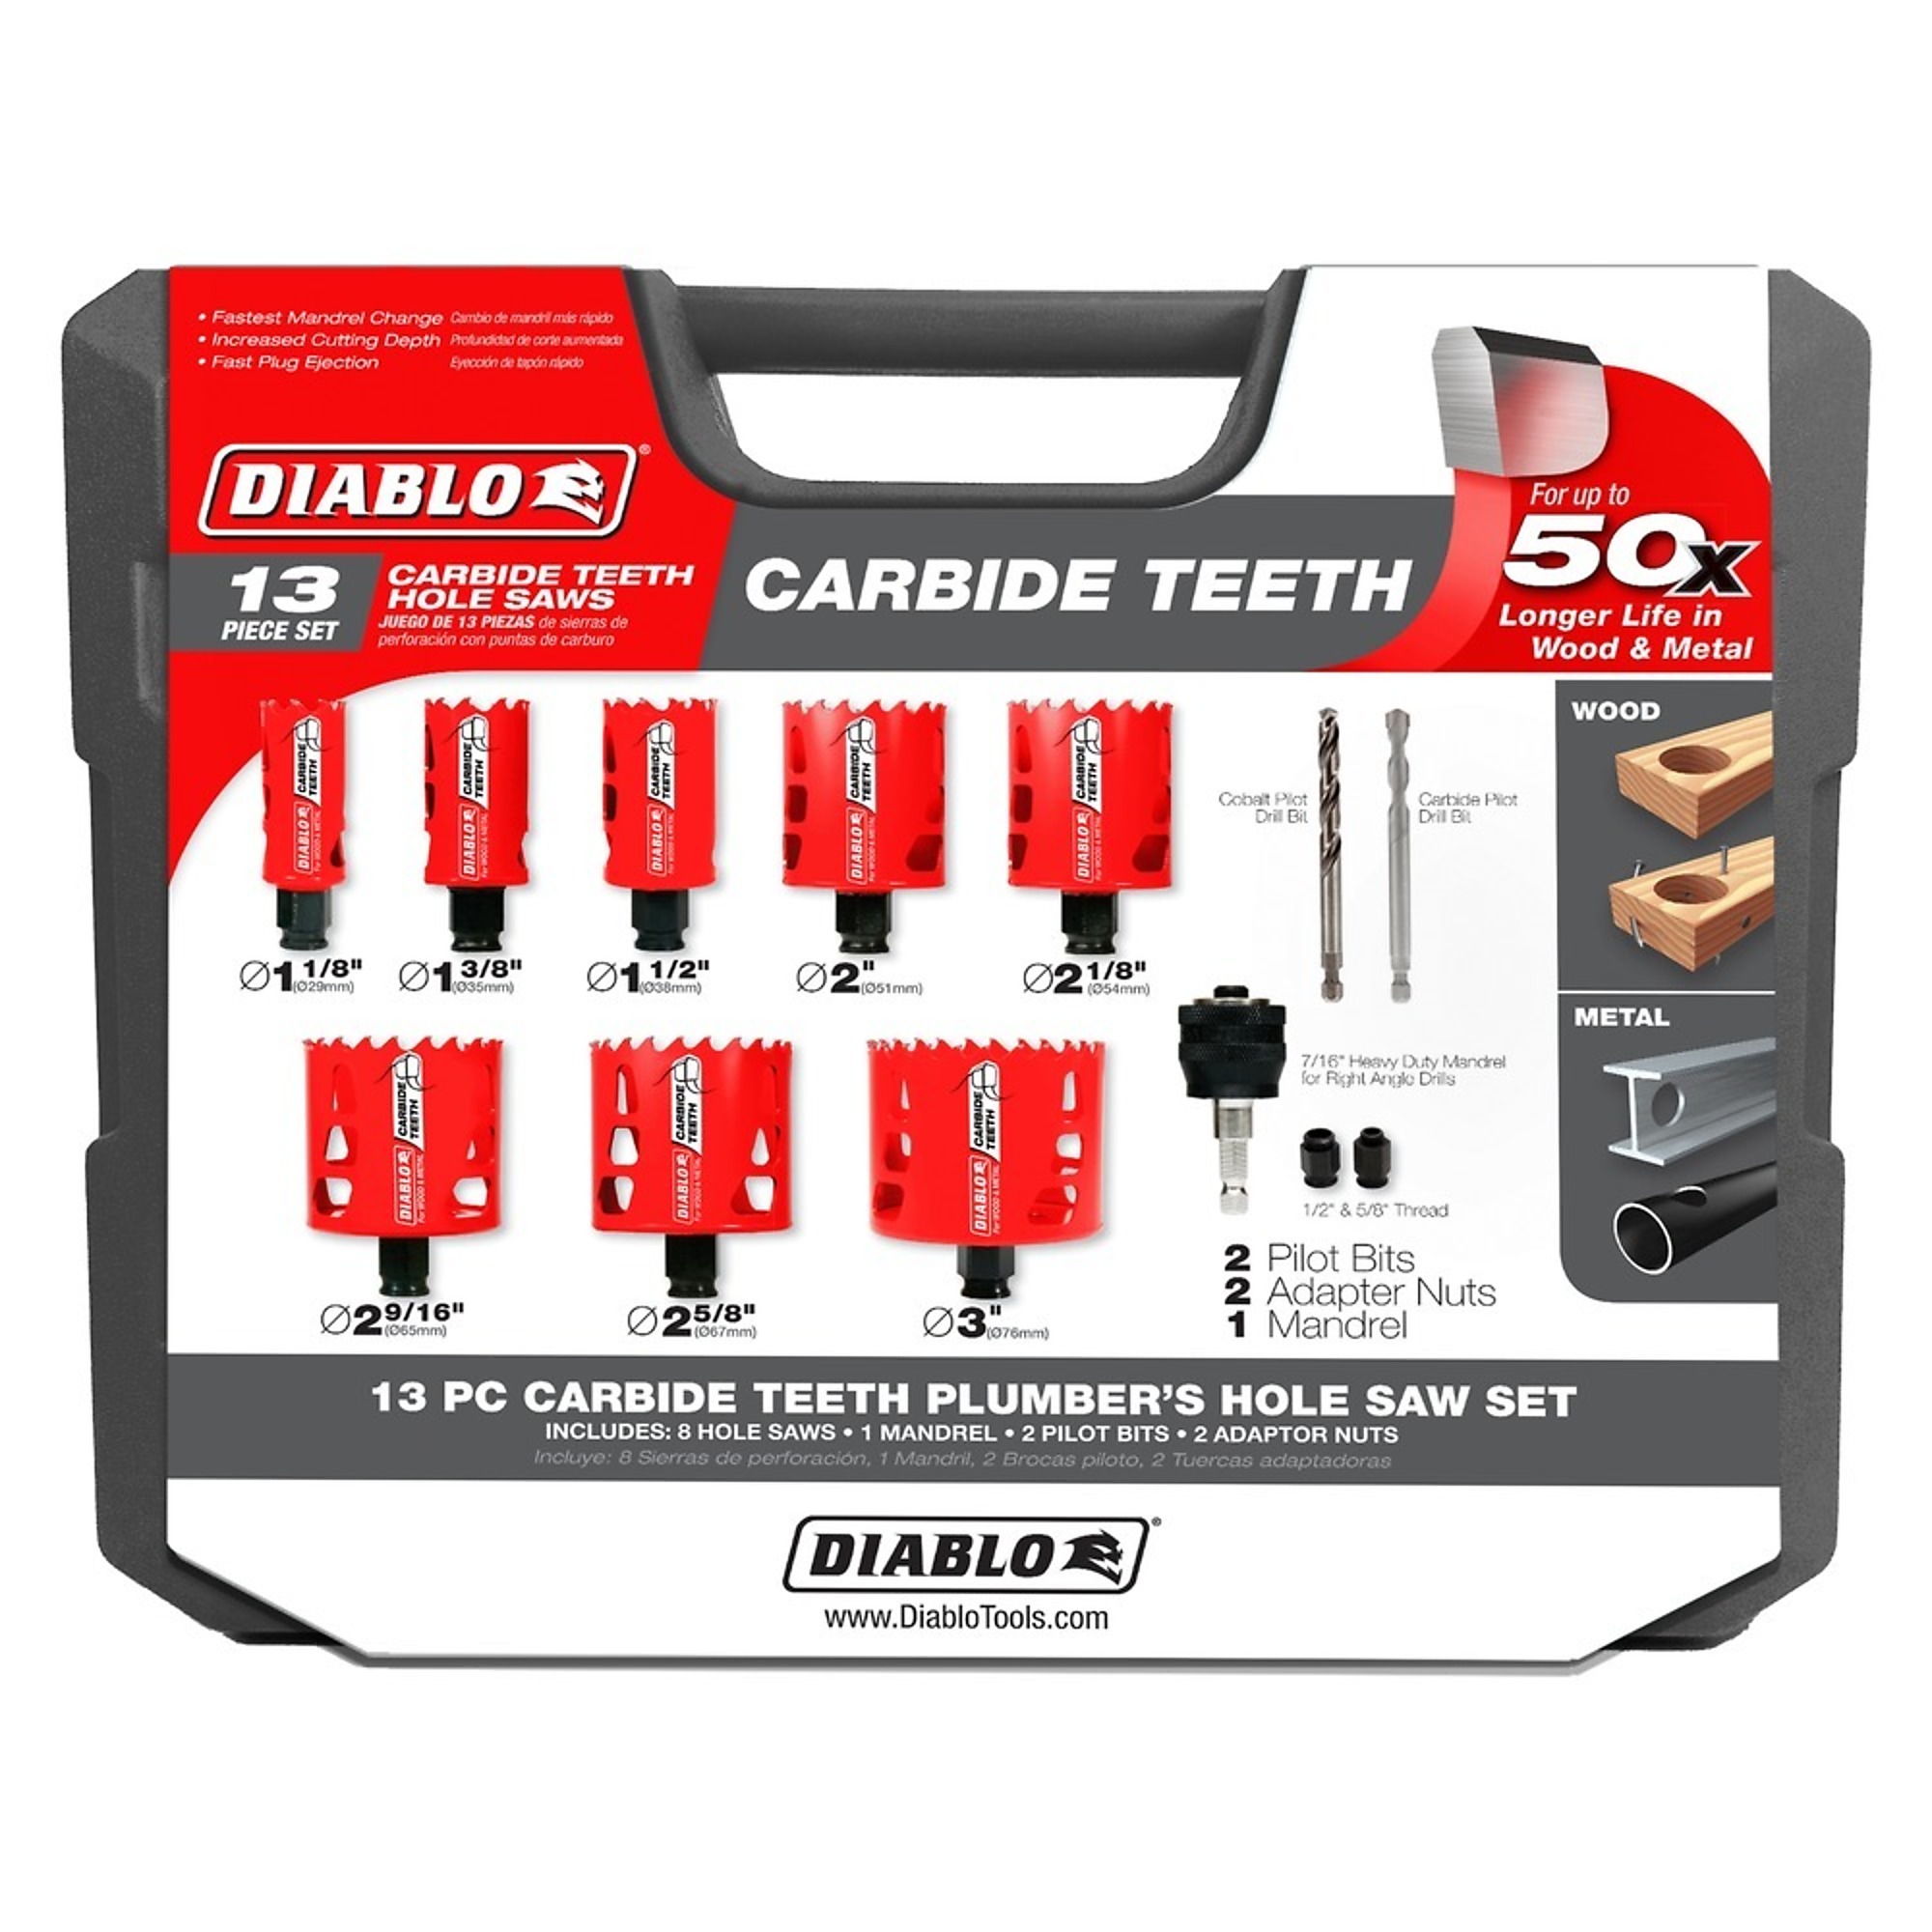 Diablo Tools, 13 pc Carbide Plumbers Hole Saw Set, Included (qty.) 1, Model DHS13SPLCT